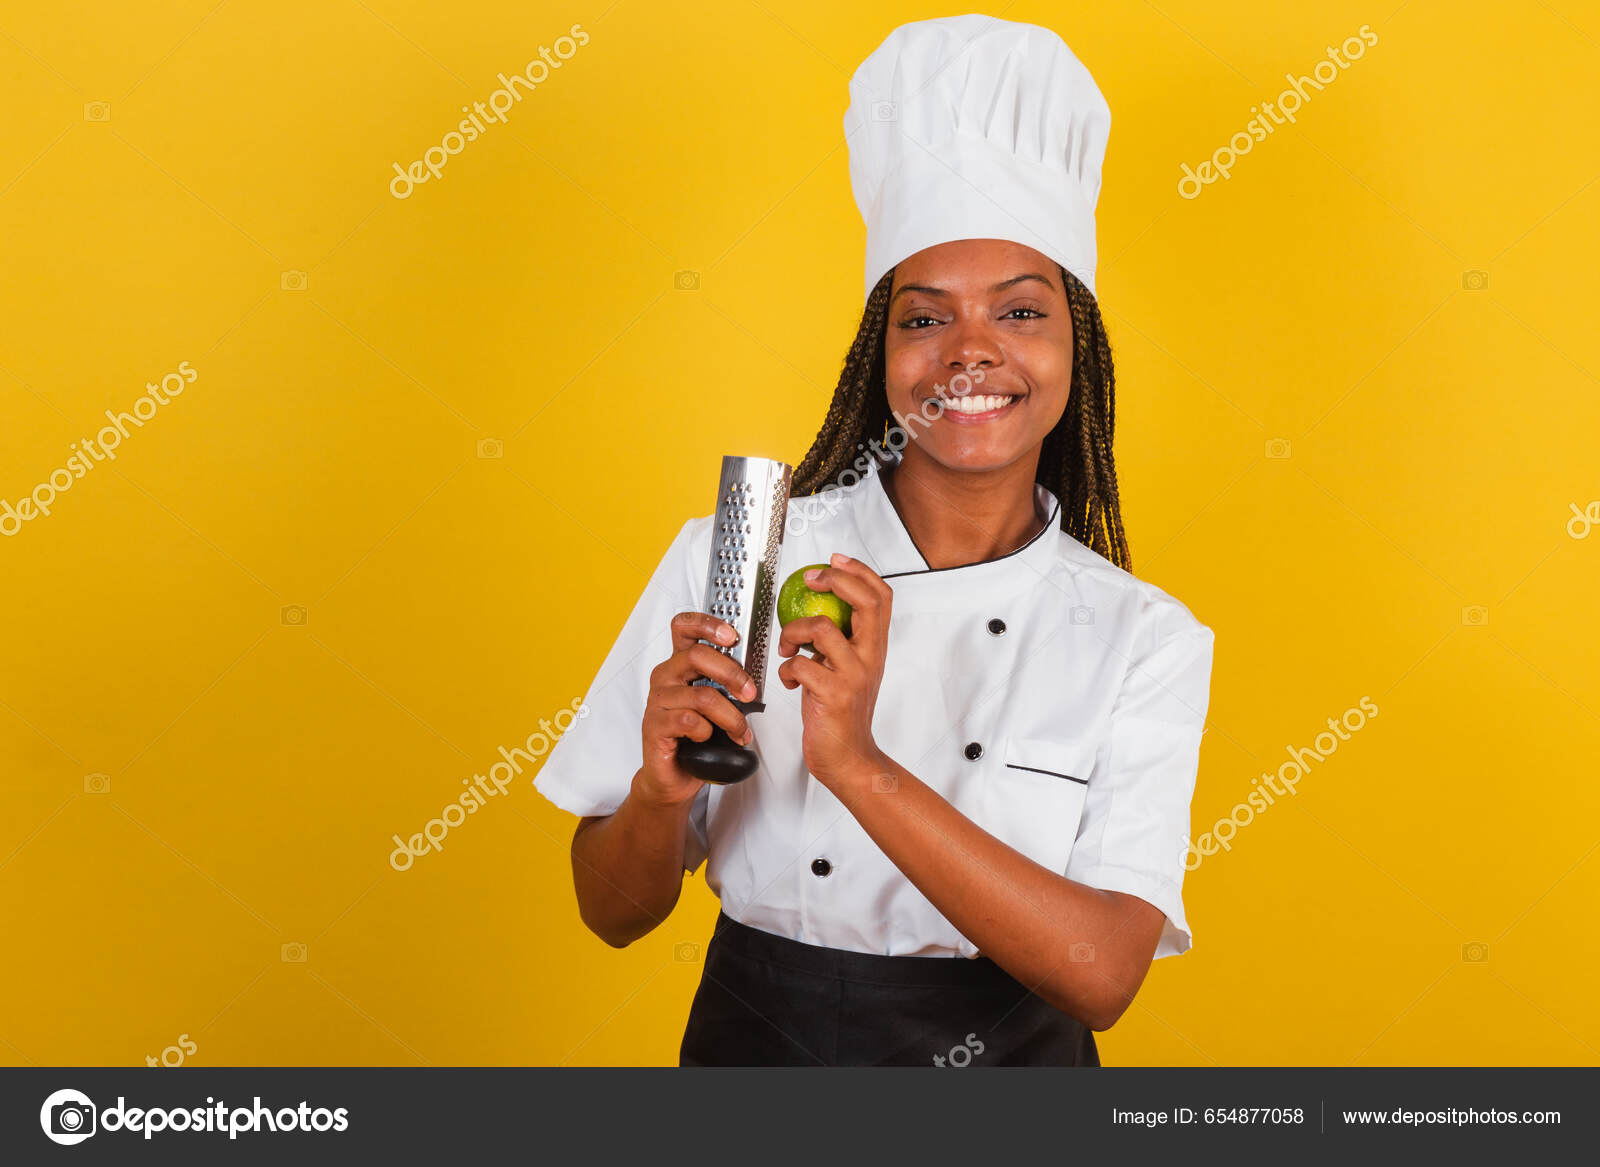 Stock　©Ibstock　Cooking　Chef　Cook　Young　by　Lemon　Photo　Grater　Afro　Brazilian　Holding　Woman　654877058